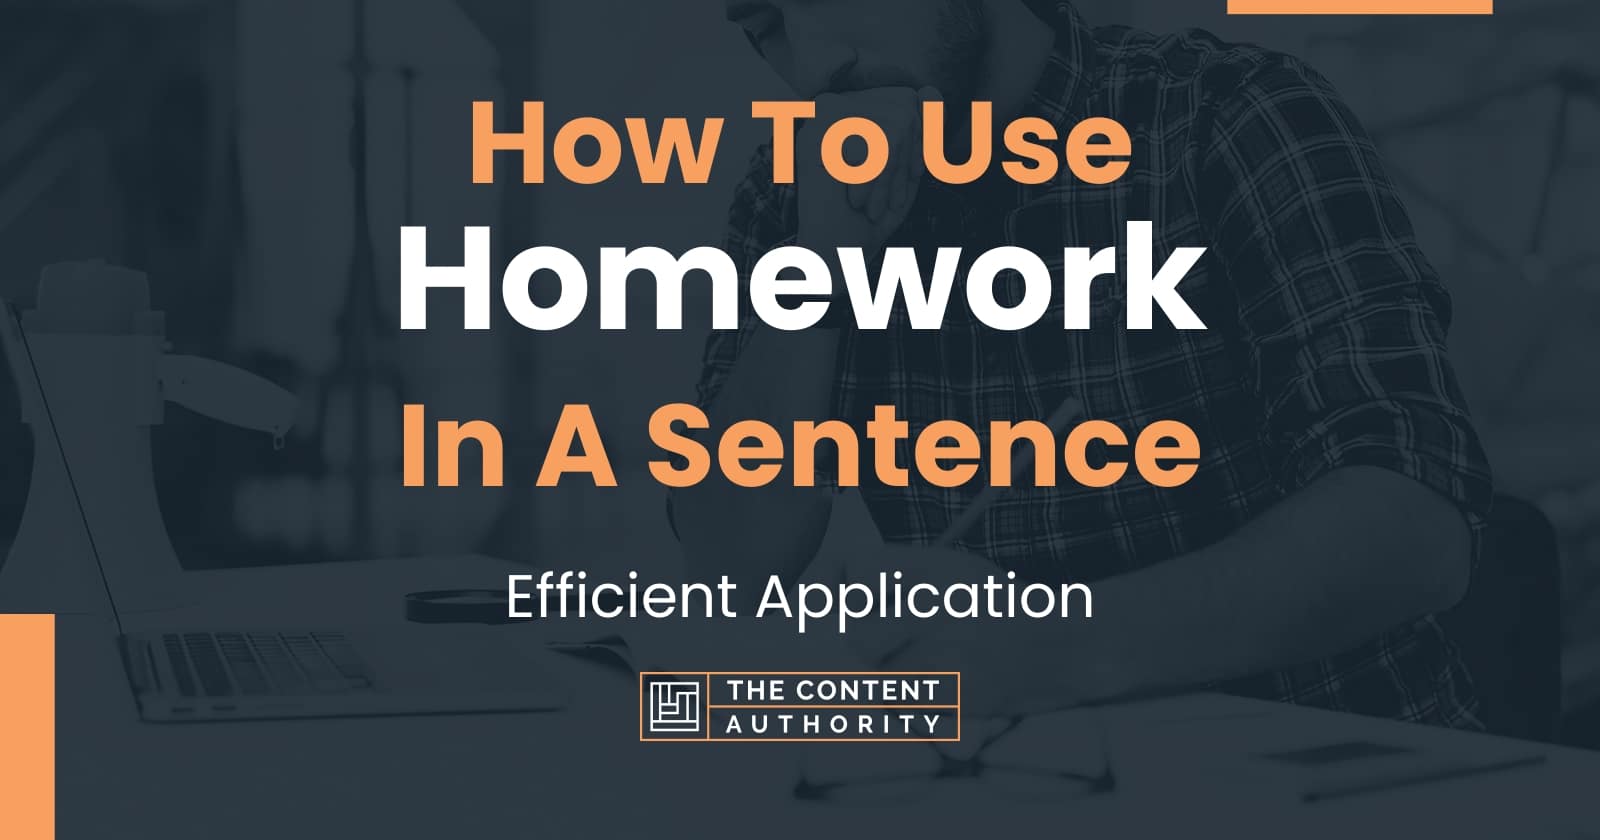 do your homework regularly which type of sentence